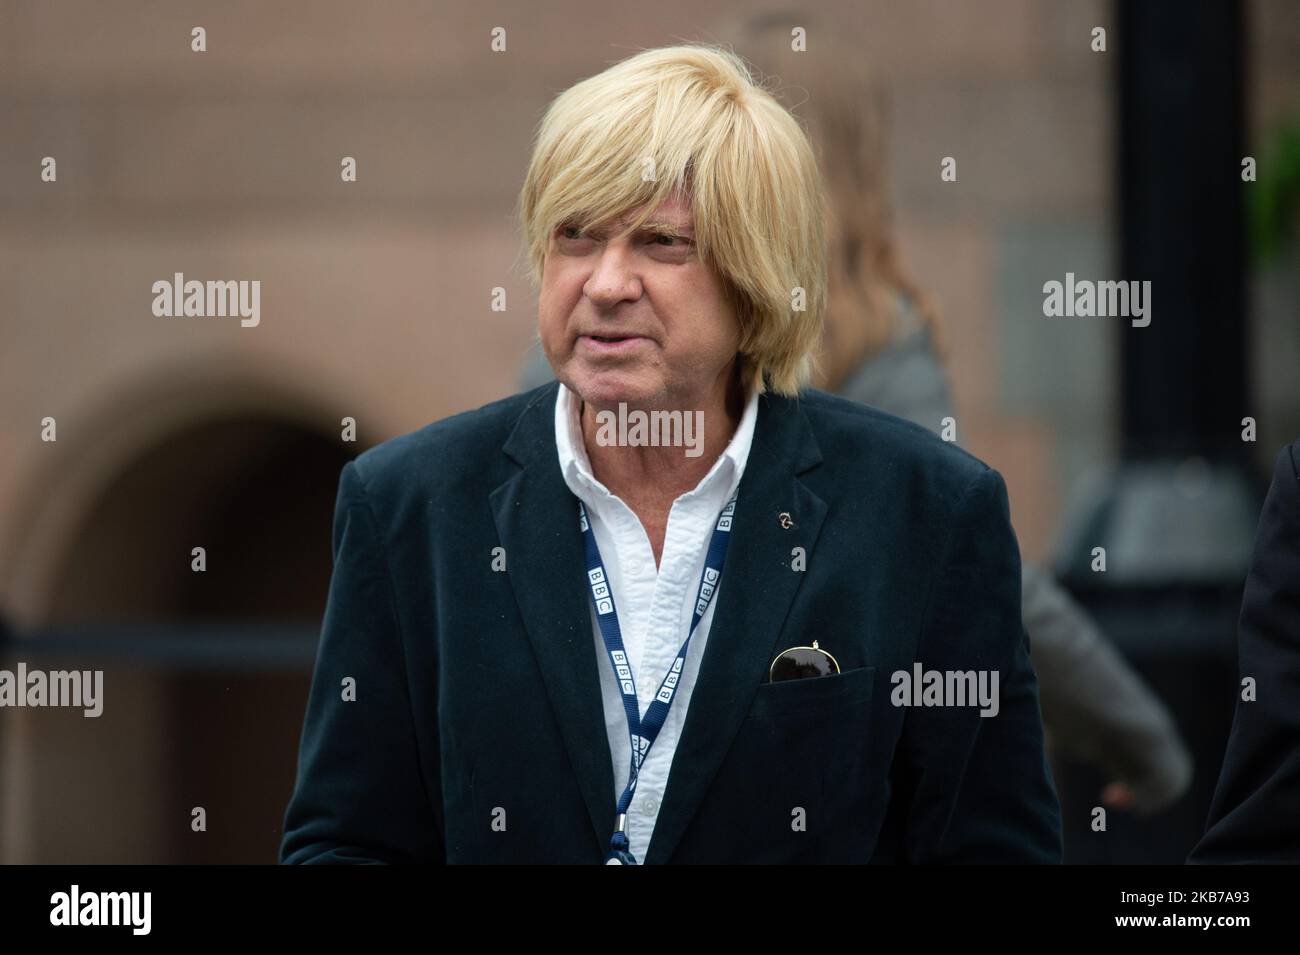 Michael Fabricant, MP for Lichfield, during the Conservative Party Conference at the Manchester Central Convention Complex, Manchester on Monday 30 September 2019 (Photo by P Scaasi/MI News/NurPhoto) Stock Photo